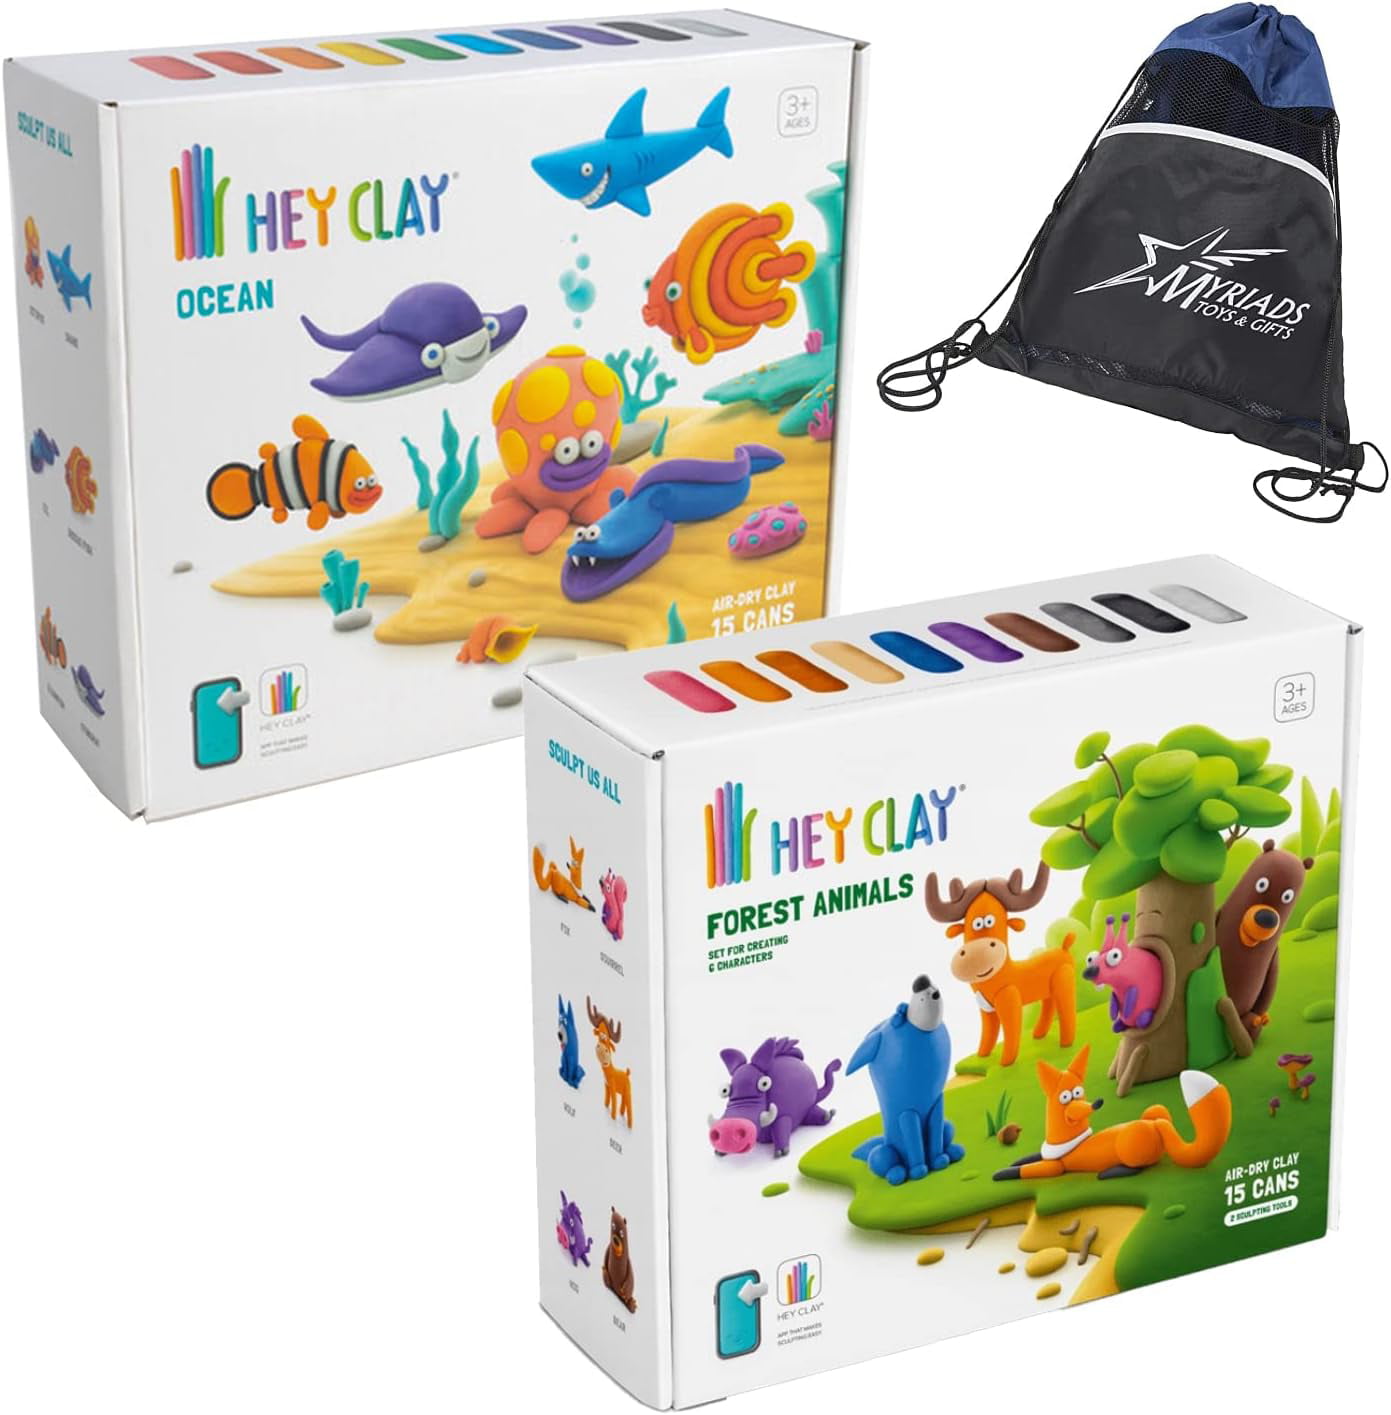 HEY CLAY Ocean: Shark, Octopus, Stingray Set - Air Dry Clay Kit 6 cans and  Sculpting Tools with Fun Interactive Instructions App